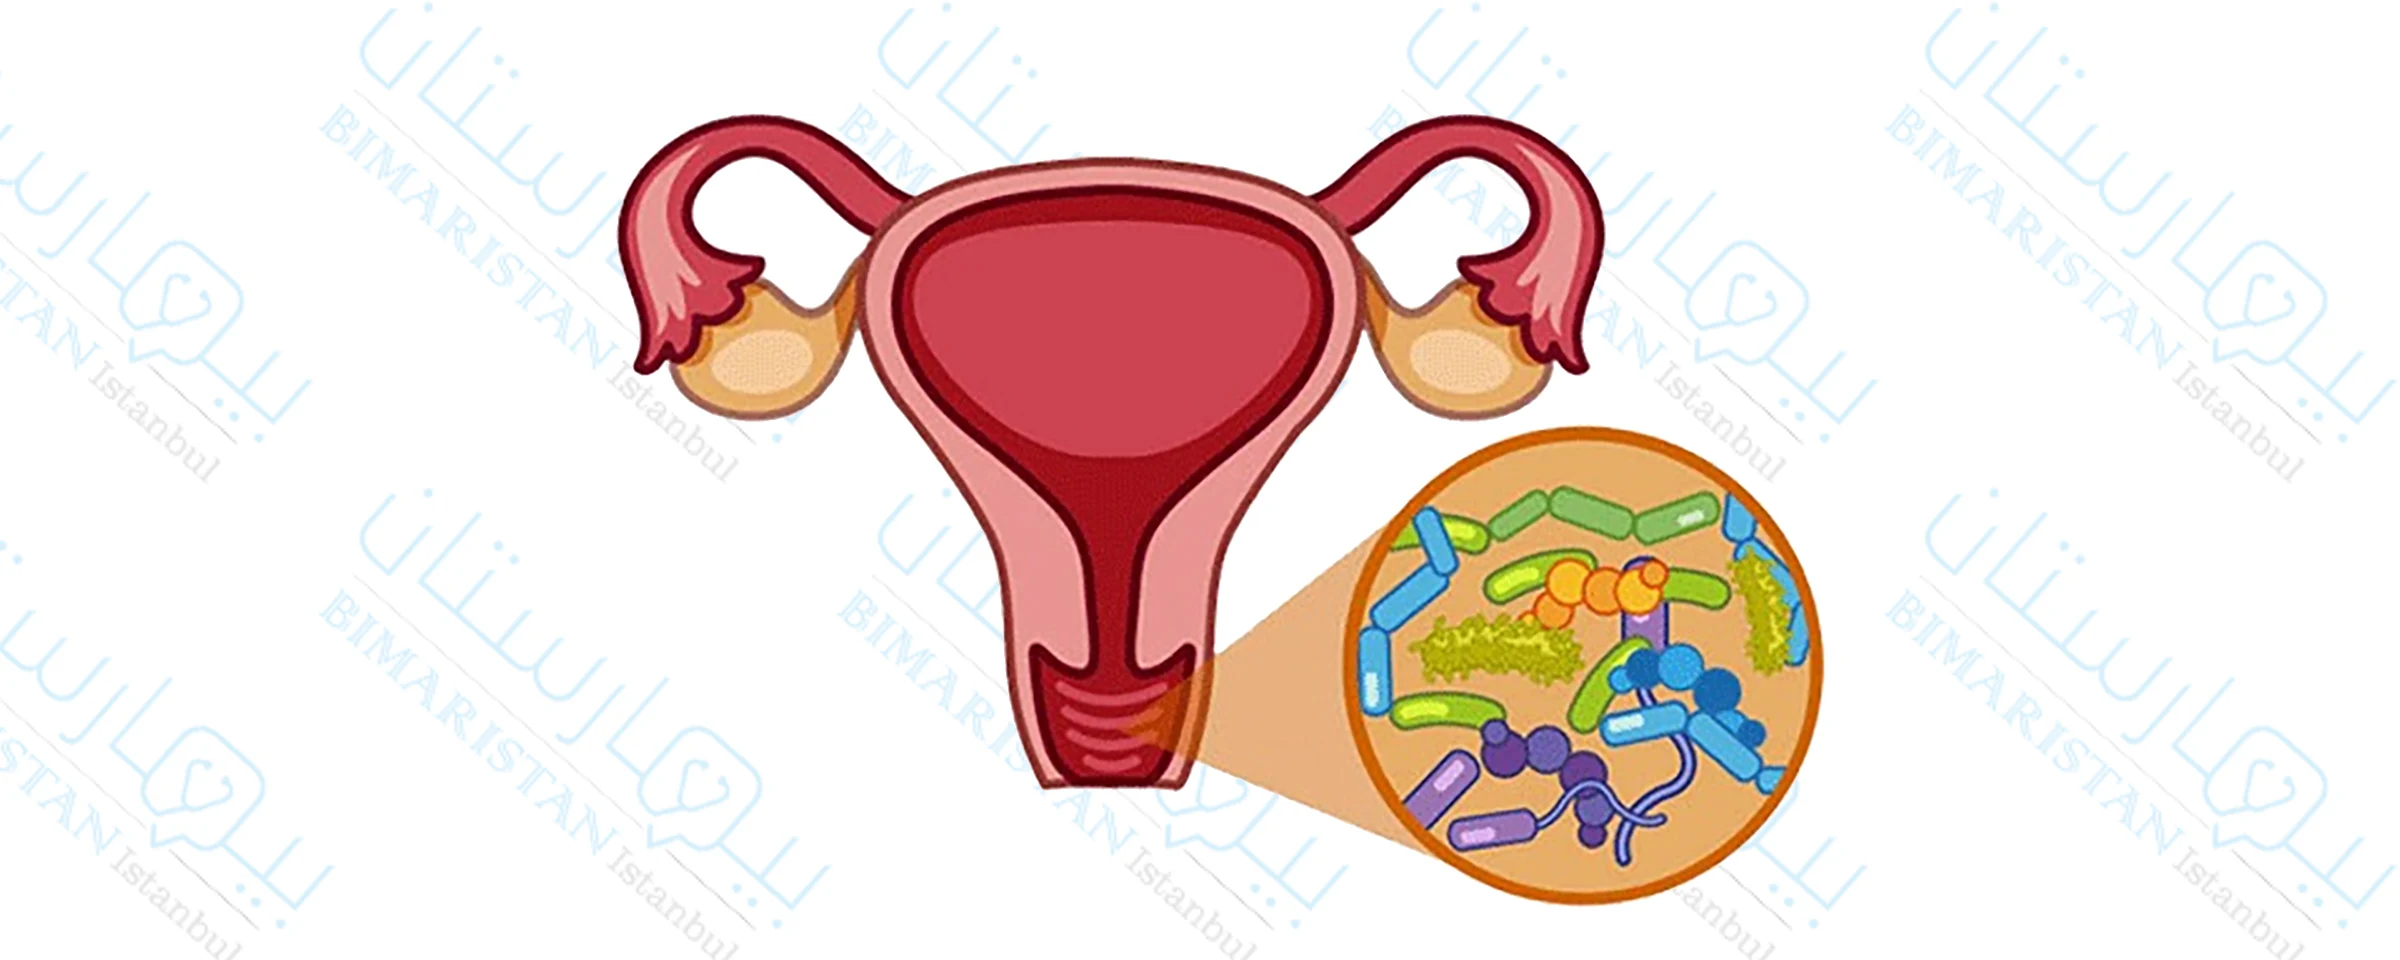 A picture showing the presence of microorganisms in the vagina in the normal state, called the vaginal flora, and there is no need to treat vaginitis for married women